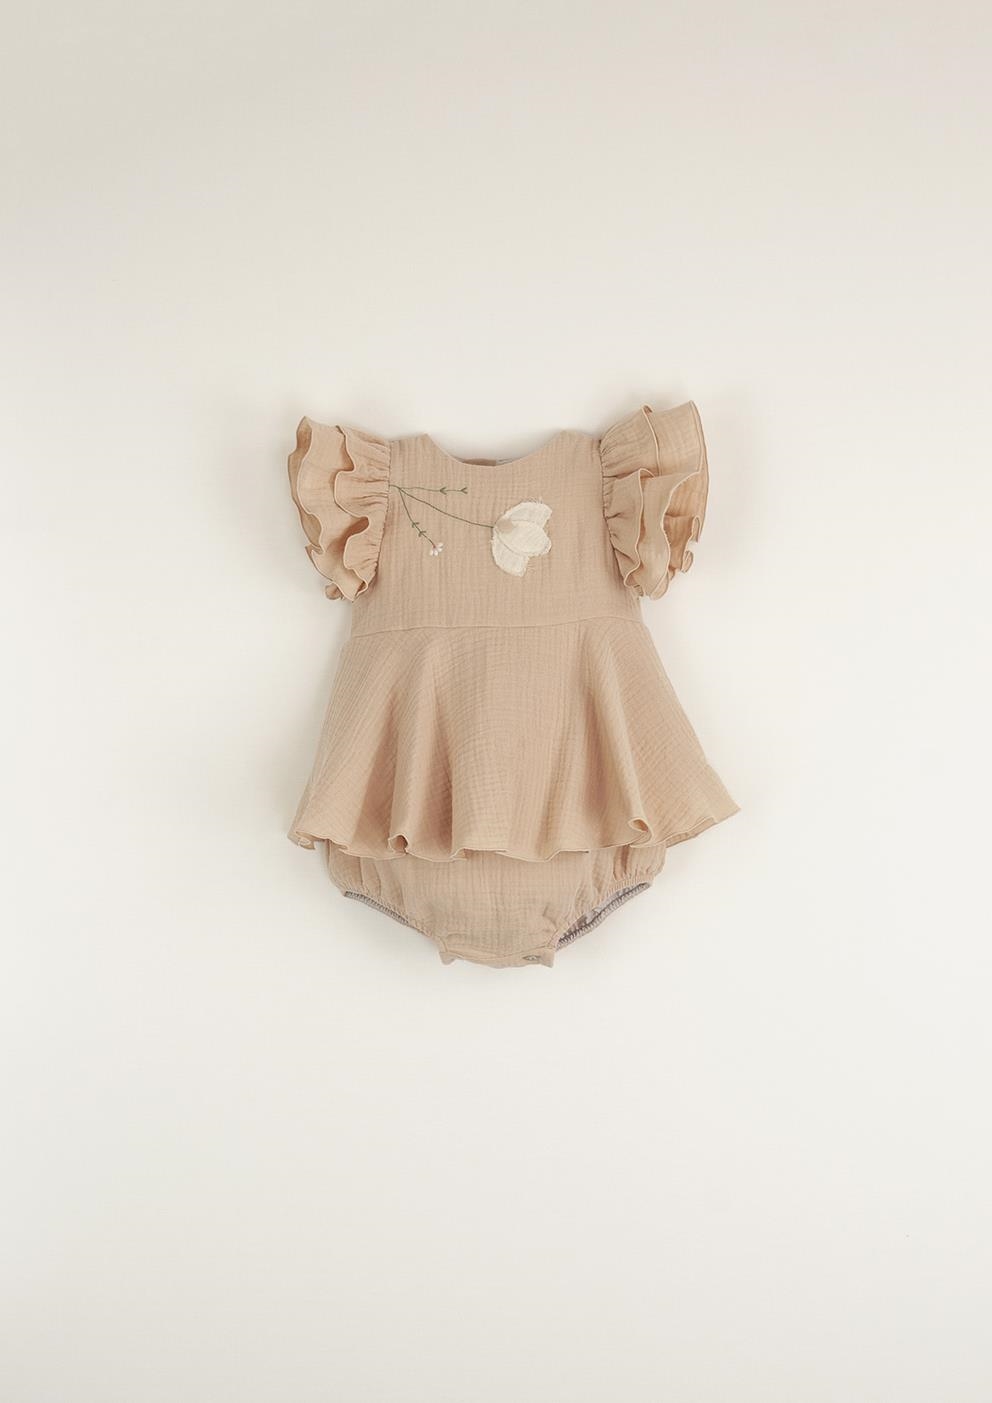 Mod.9.2 Organic pink romper suit with cape-style skirt | SS23 Mod.9.2 Organic pink romper suit with cape-style skirt